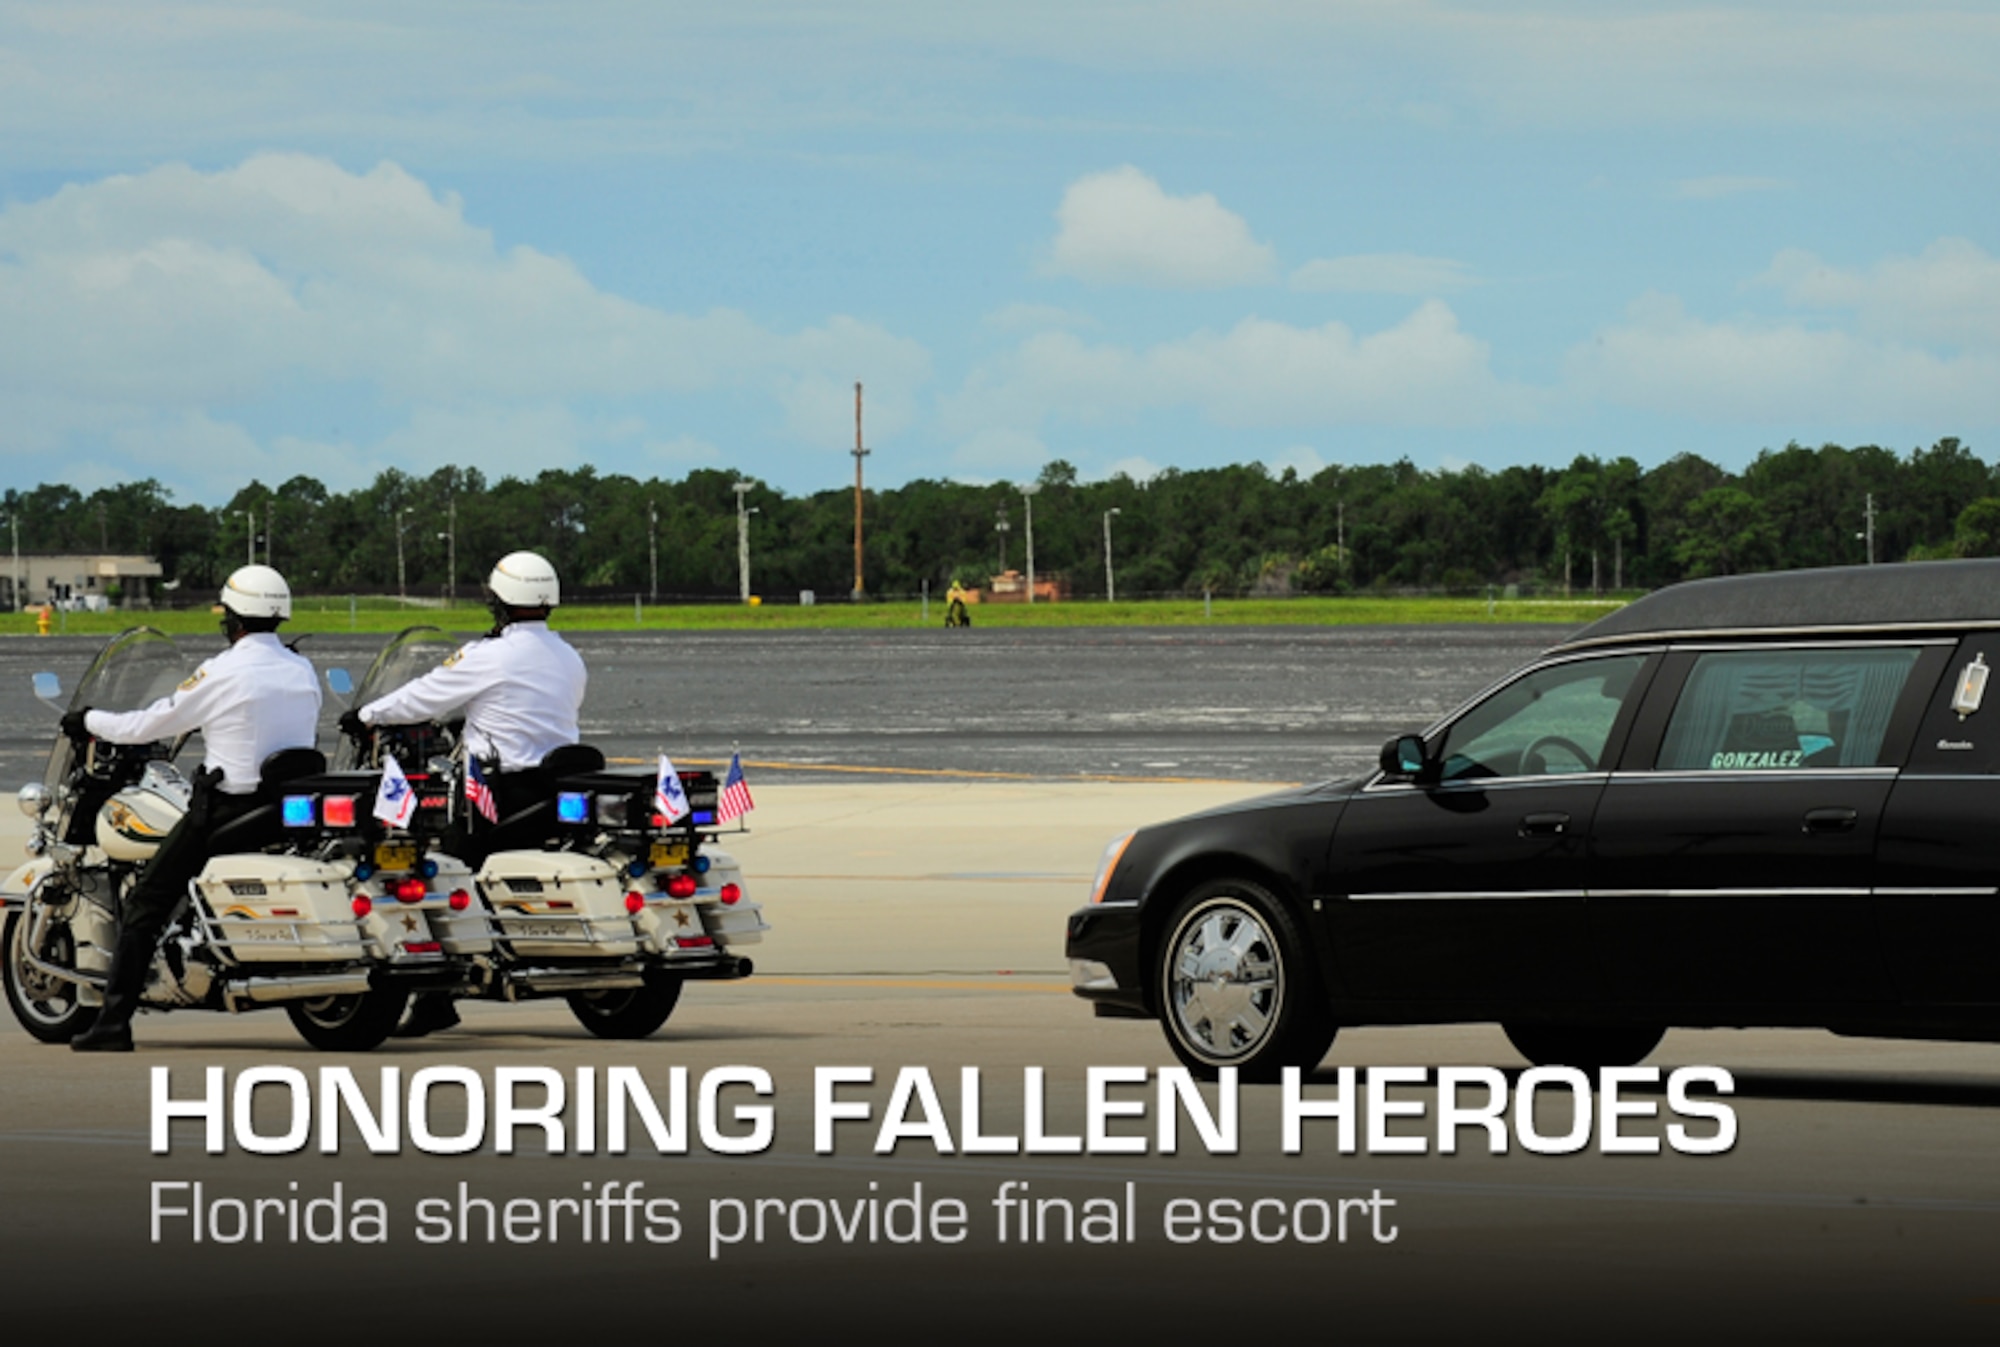 Hillsborough Sheriff's County deputies escort a hearse carrying a fallen Solider Army Staff Sgt. Ricardo Seija’s remains from the flightline at MacDill Air Force Base’s , July 17, 2012. Seija died July 8, of wounds suffered from an improvised explosive device when enemy forces attacked his unit in Maidan Shahr, Wardak province, Afghanistan., He was 31-years-old. (U.S. Air Force photo by Staff Sgt. Angela Ruiz) 